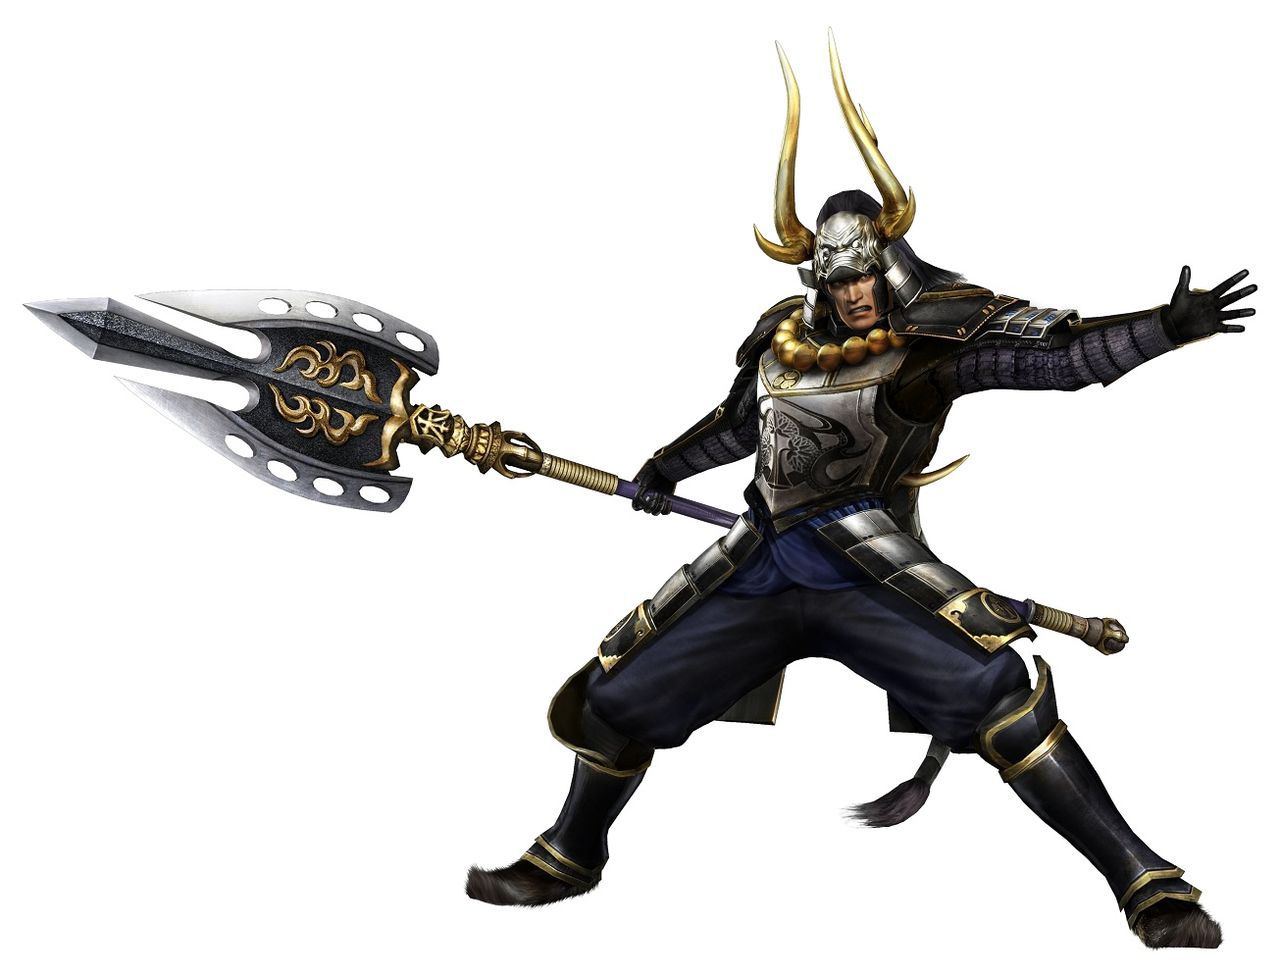 Image of the character in the Samurai Warriors series summary 65